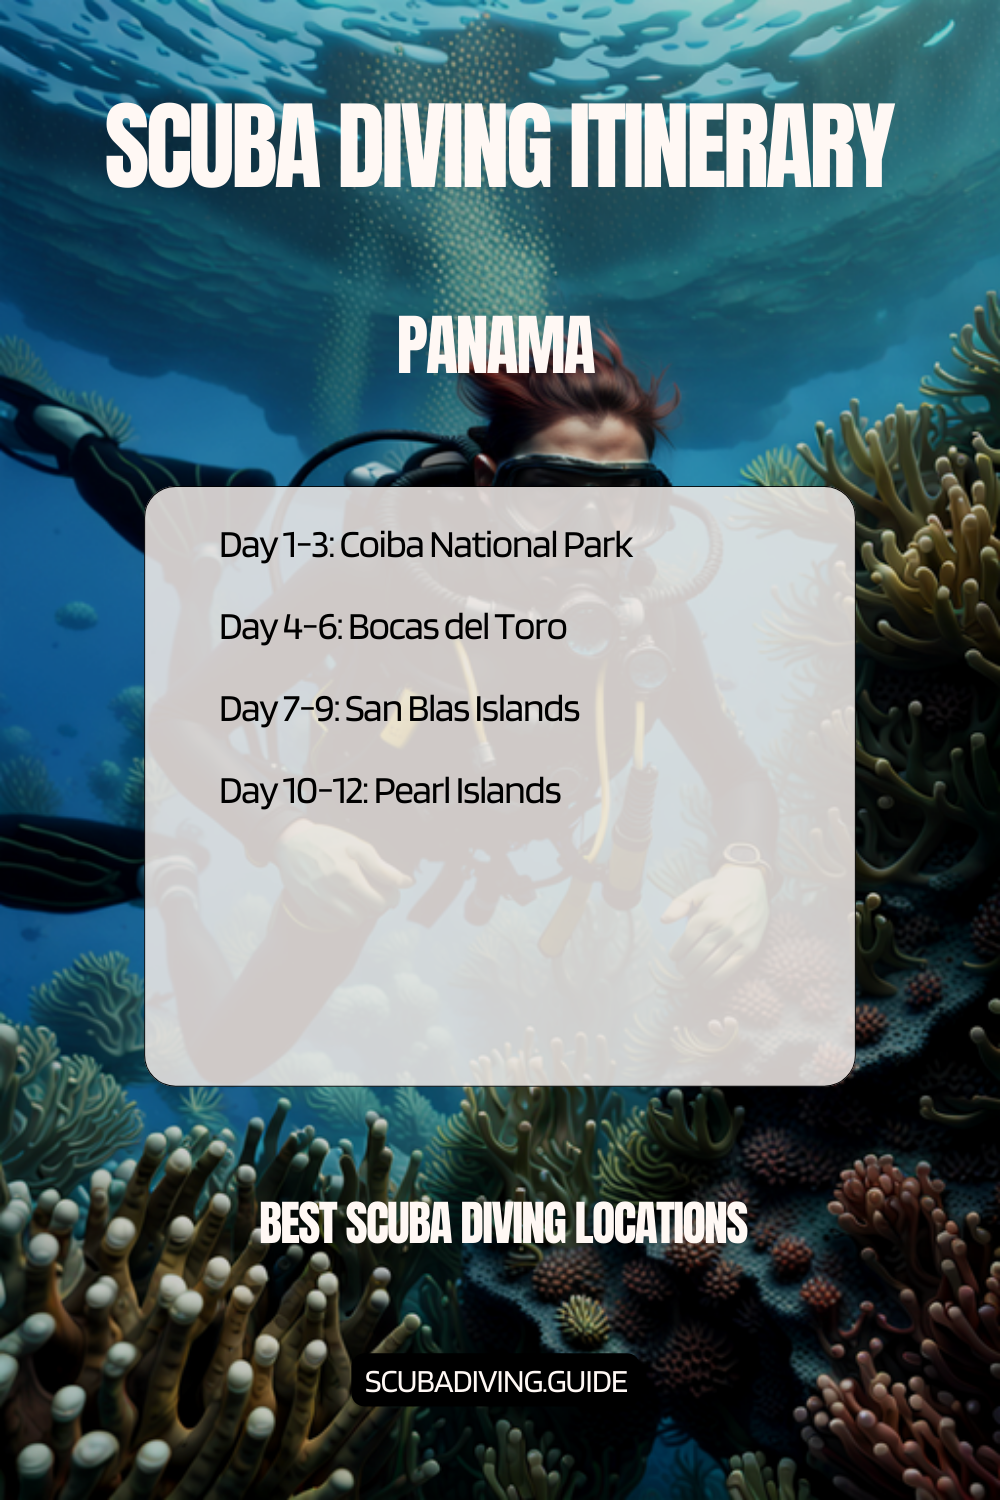 Panama Recommended Scuba Diving Itinerary